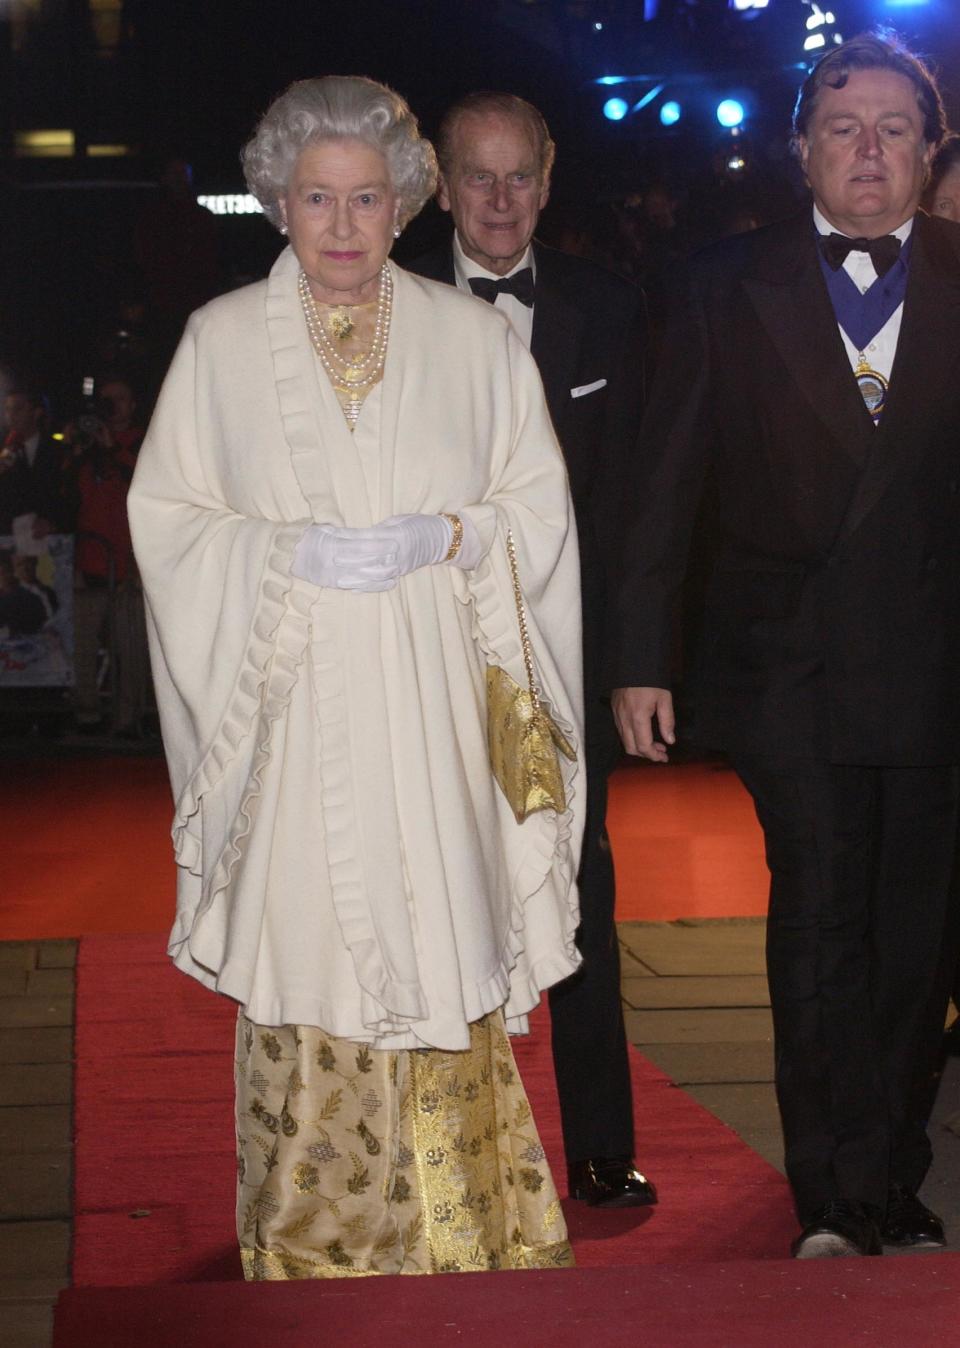 The Queen at the premiere of ‘Die Another Day’ in London in 2002